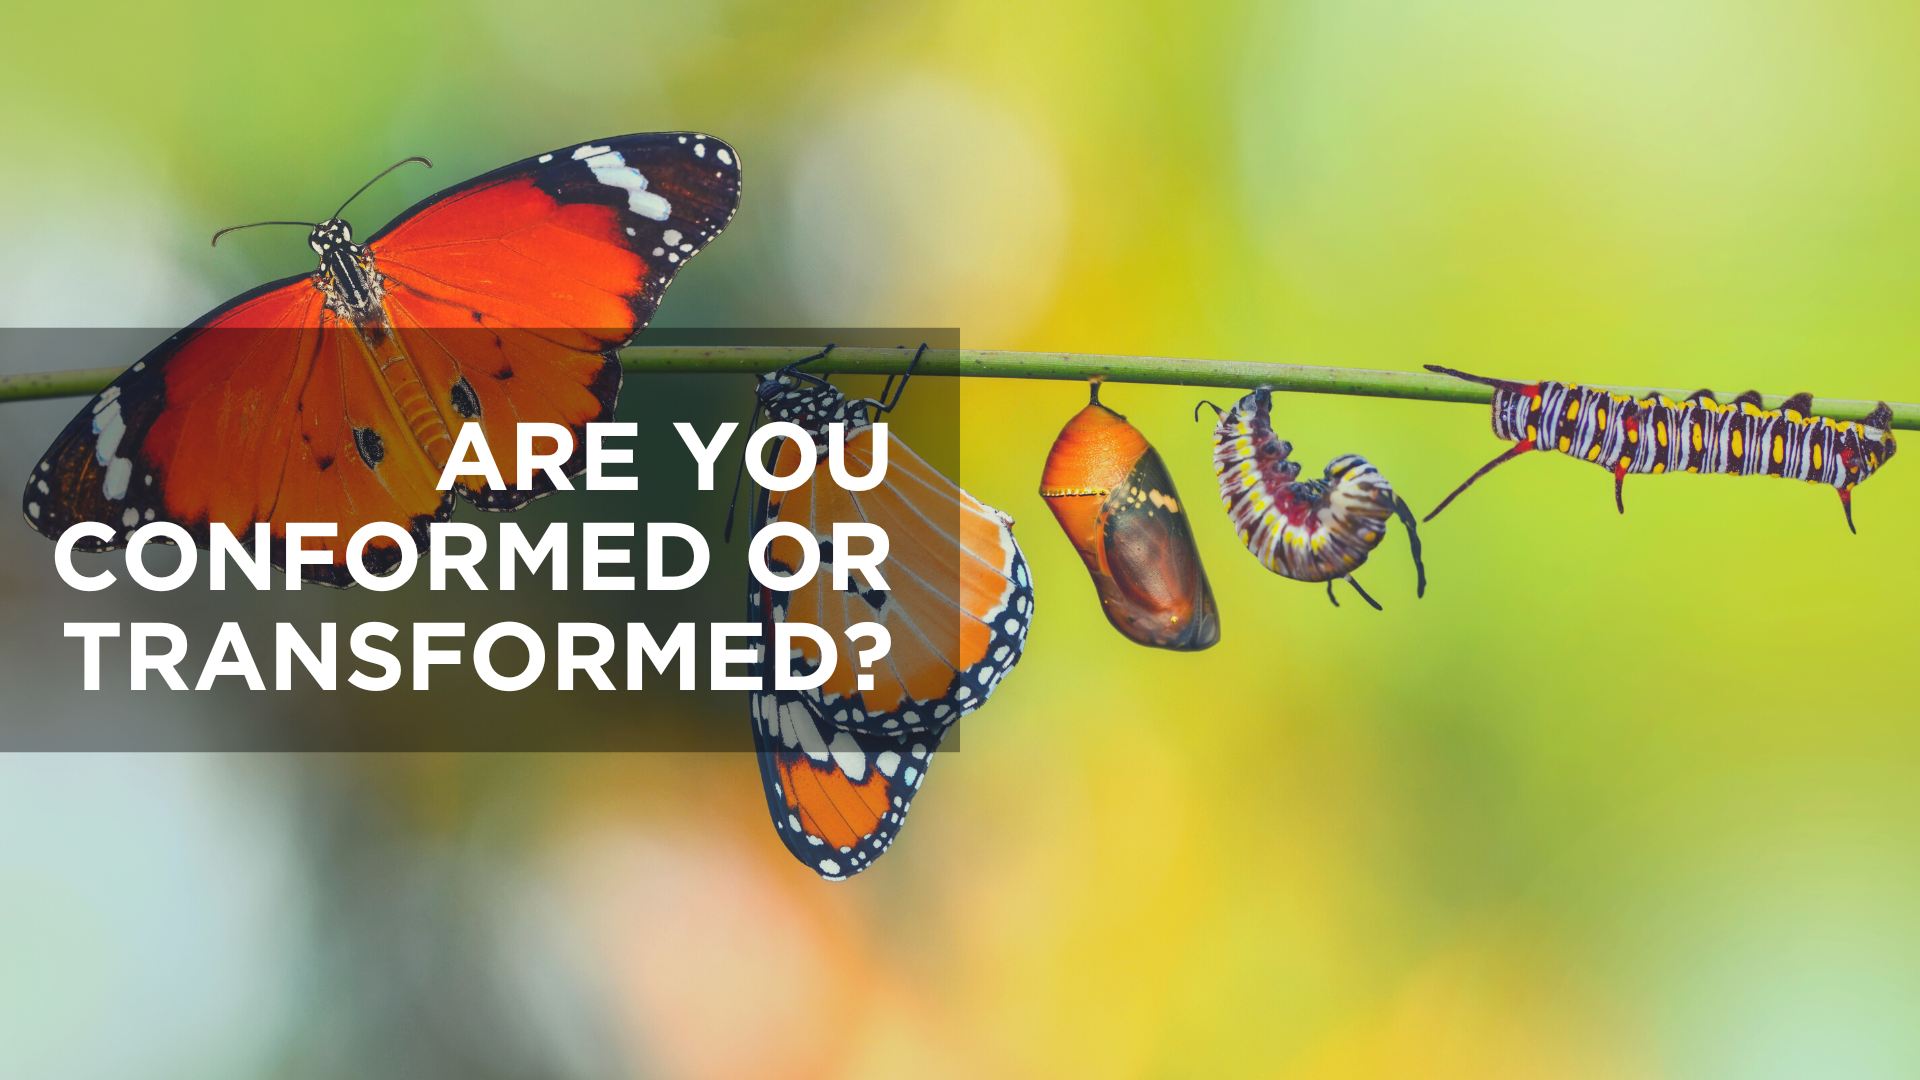 Are You Conformed or Transformed?